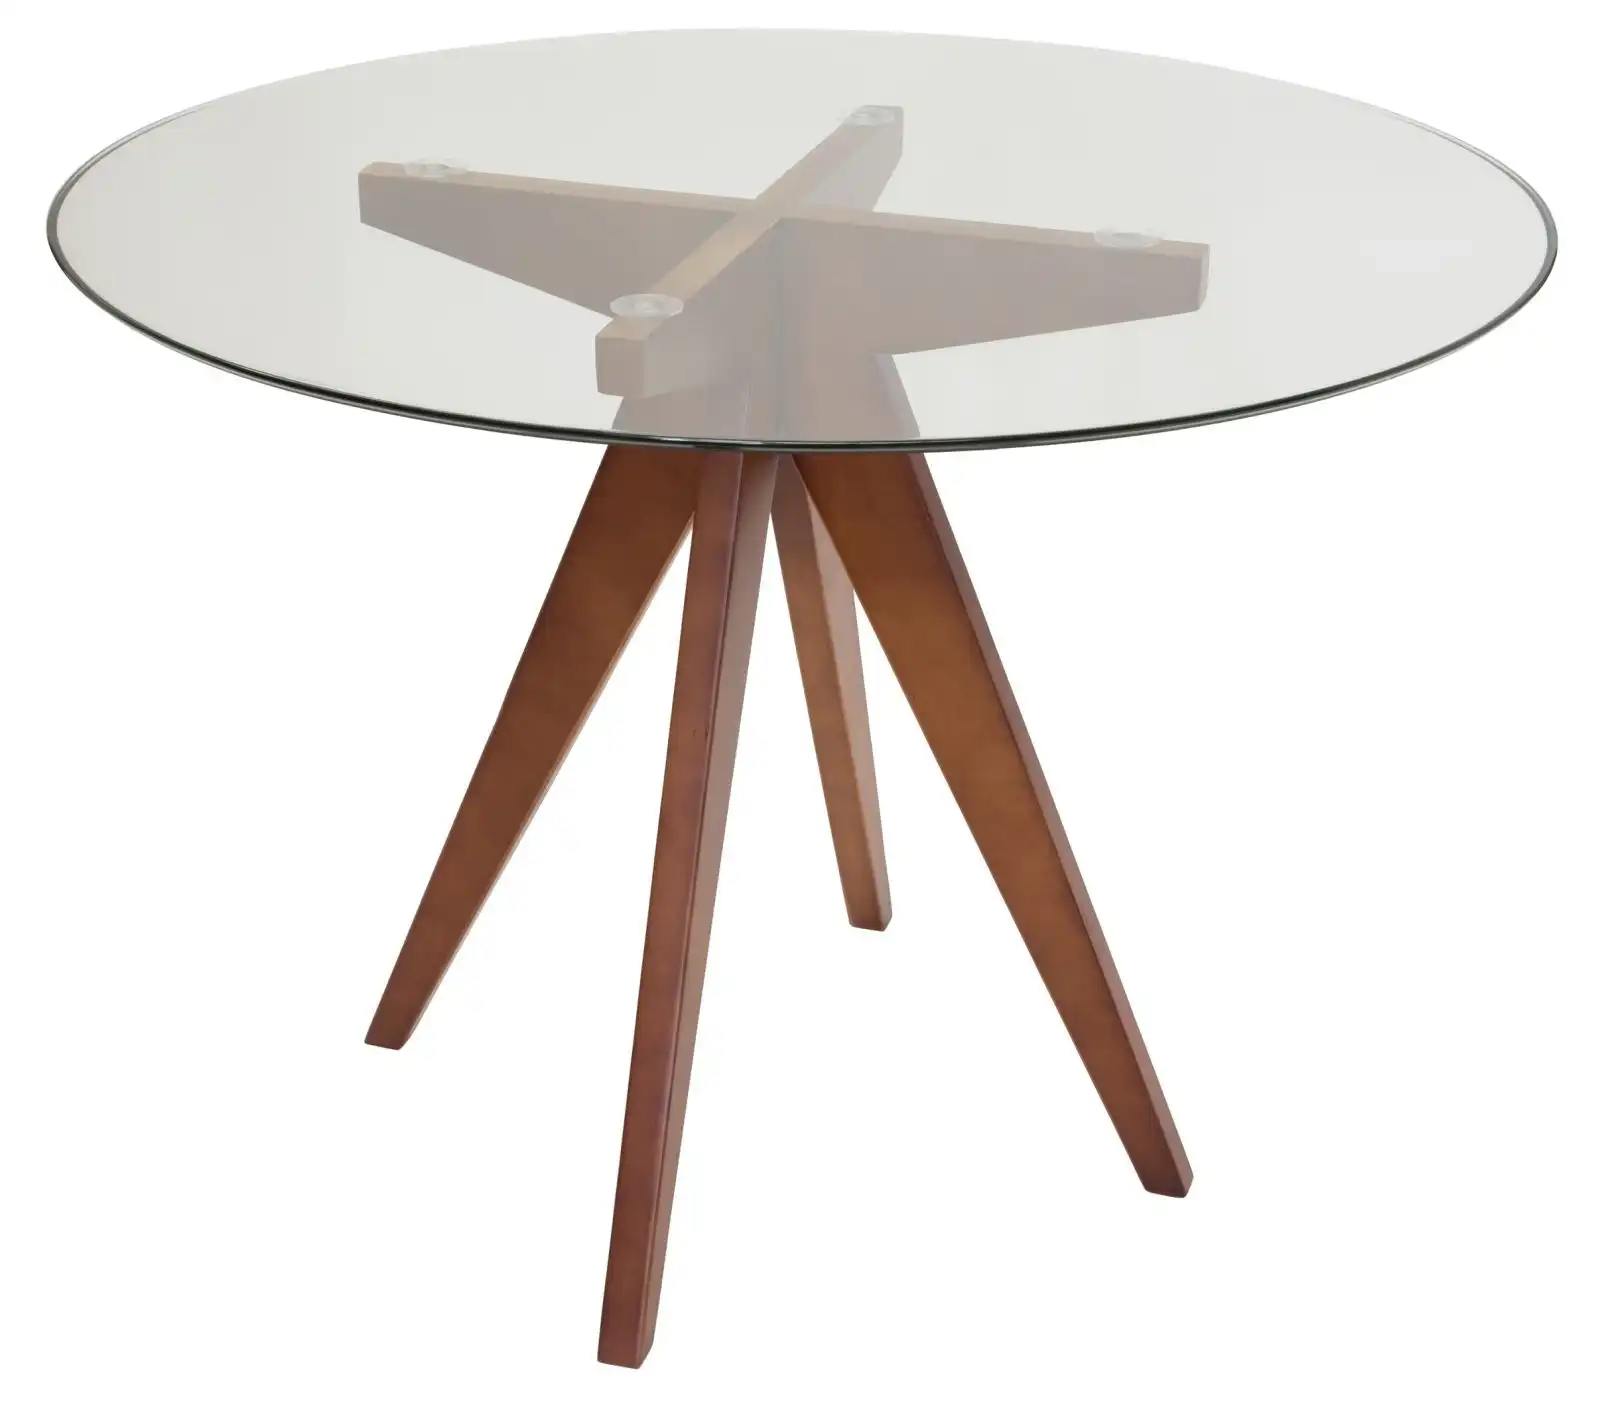 Jean Prouve Inspired Round Glass Dining Table | 100cm